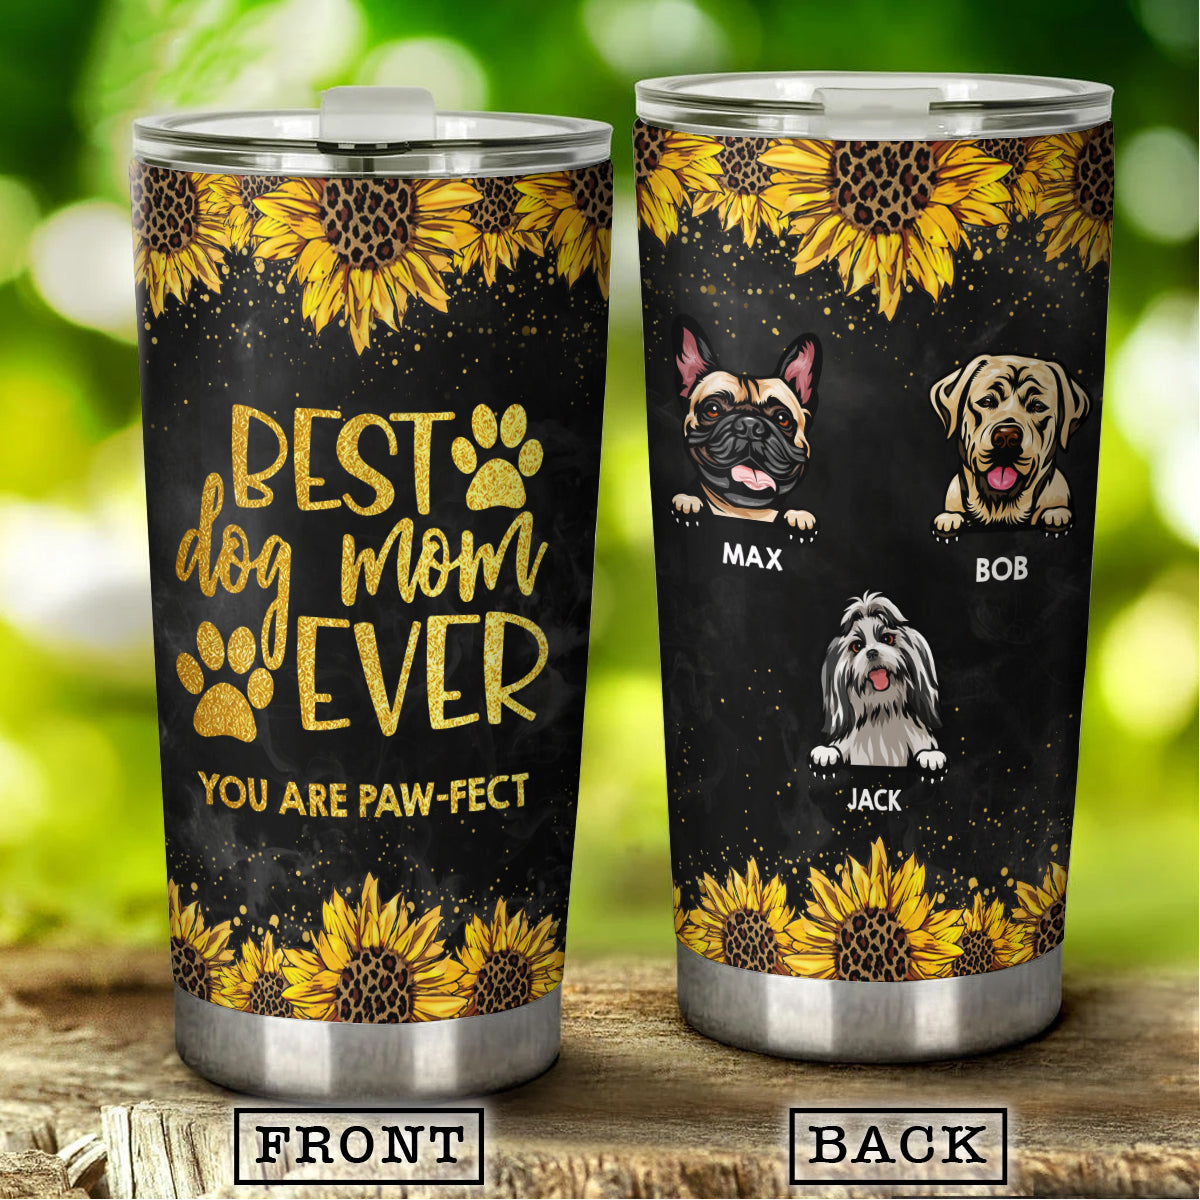 Best Dog Mom Ever You are PAW-fect Tumbler, Dog Lover Gift AA